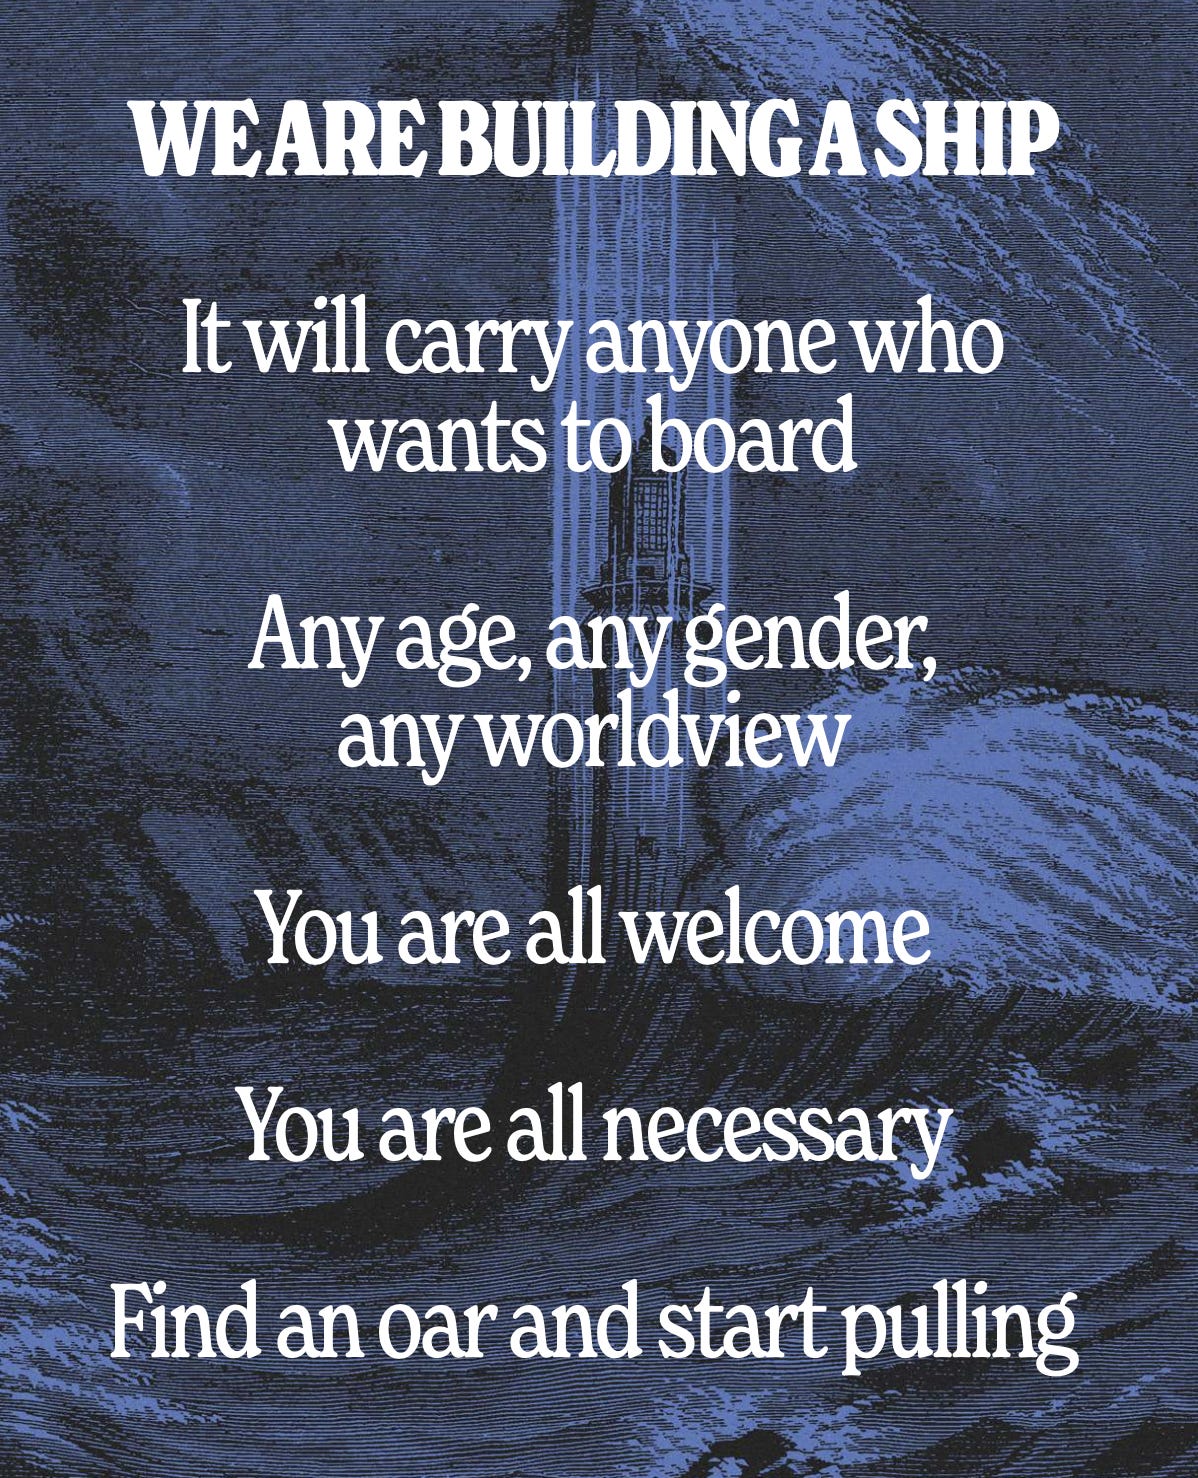 An image from The Blue Pill Book that reads, “We are building a ship. It will carry anyone who wants to board. Any age, any gender, any worldview. You are all welcome. You are all necessary. Find an oar and start pulling.”